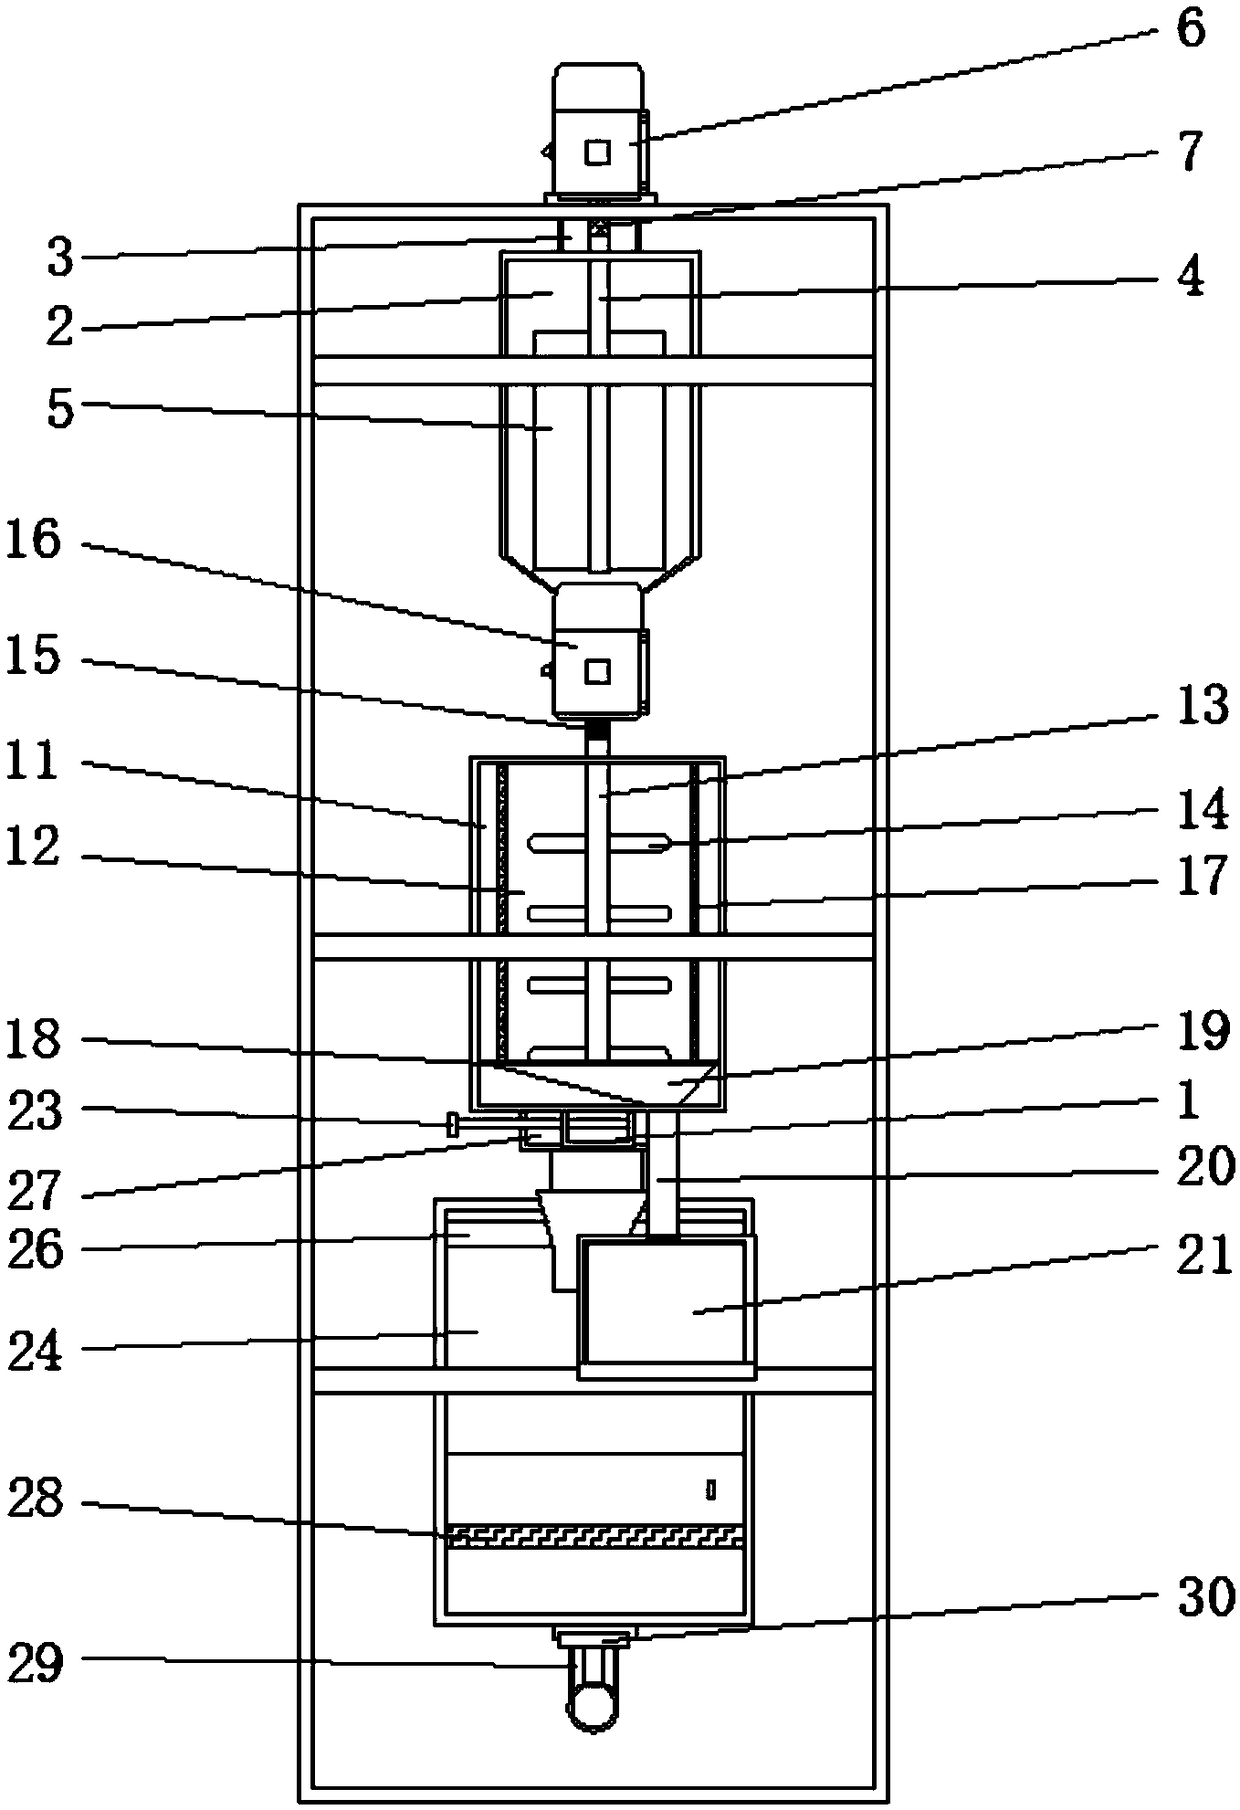 An edible-oil raw material extruding device capable of convenient second-time stirring